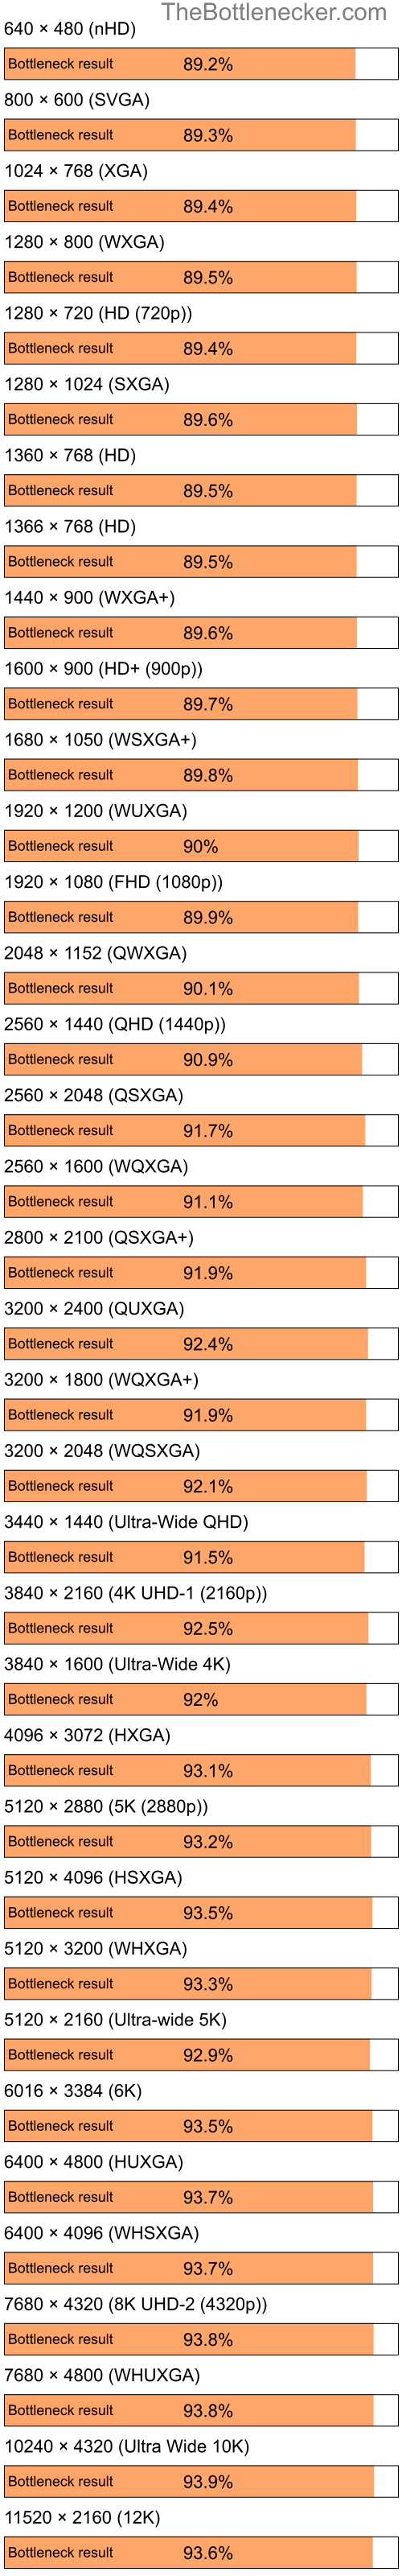 Bottleneck results by resolution for Intel Pentium 4 and NVIDIA GeForce2 GTS in General Tasks